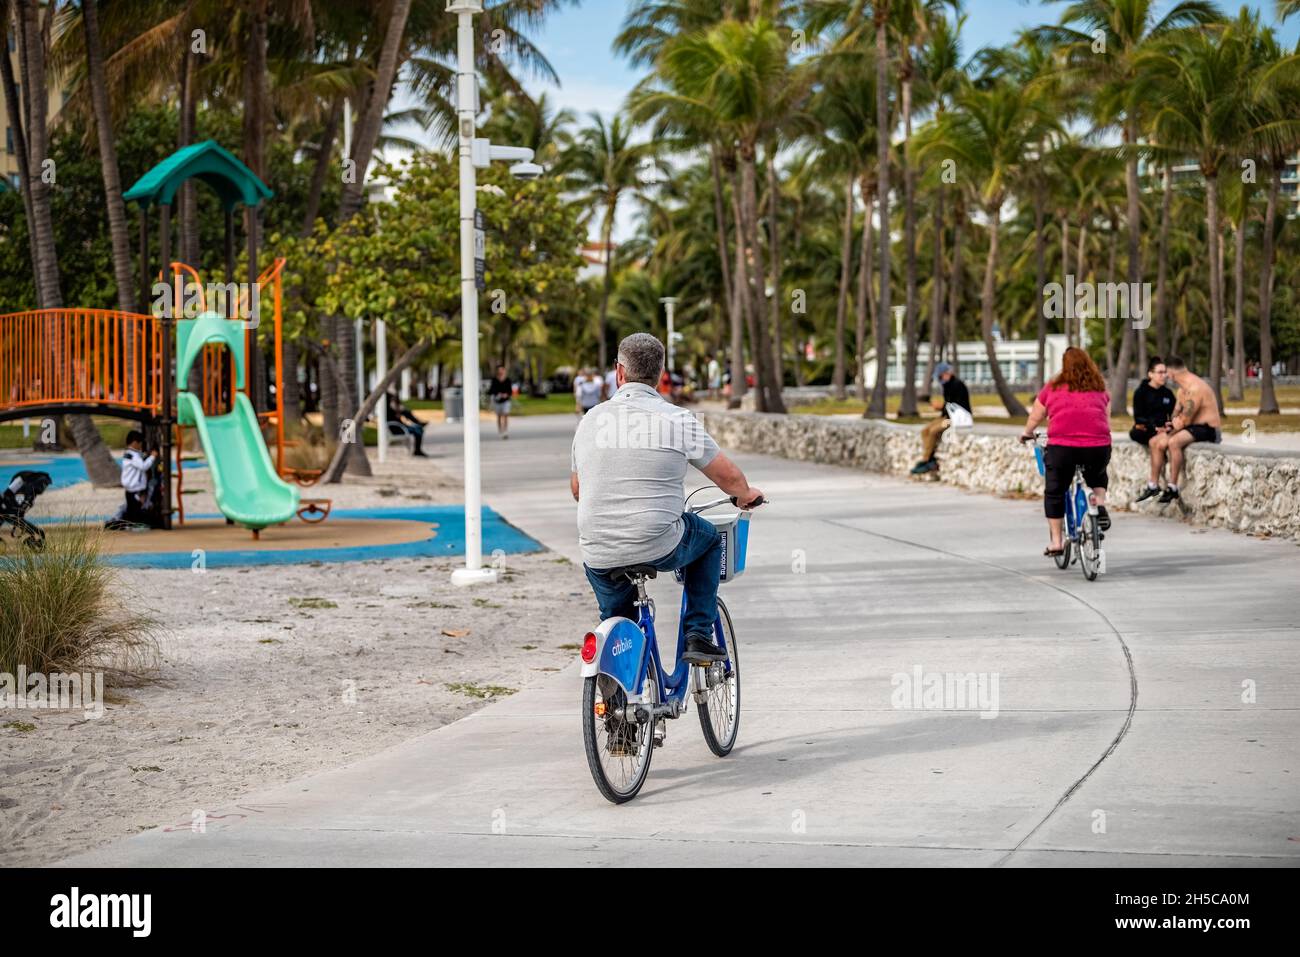 Miami Beach, USA - January 17, 2021: People riding bicycles on ocean walk boardwalk at Lummus public park by Ocean drive in art deco district of South Stock Photo